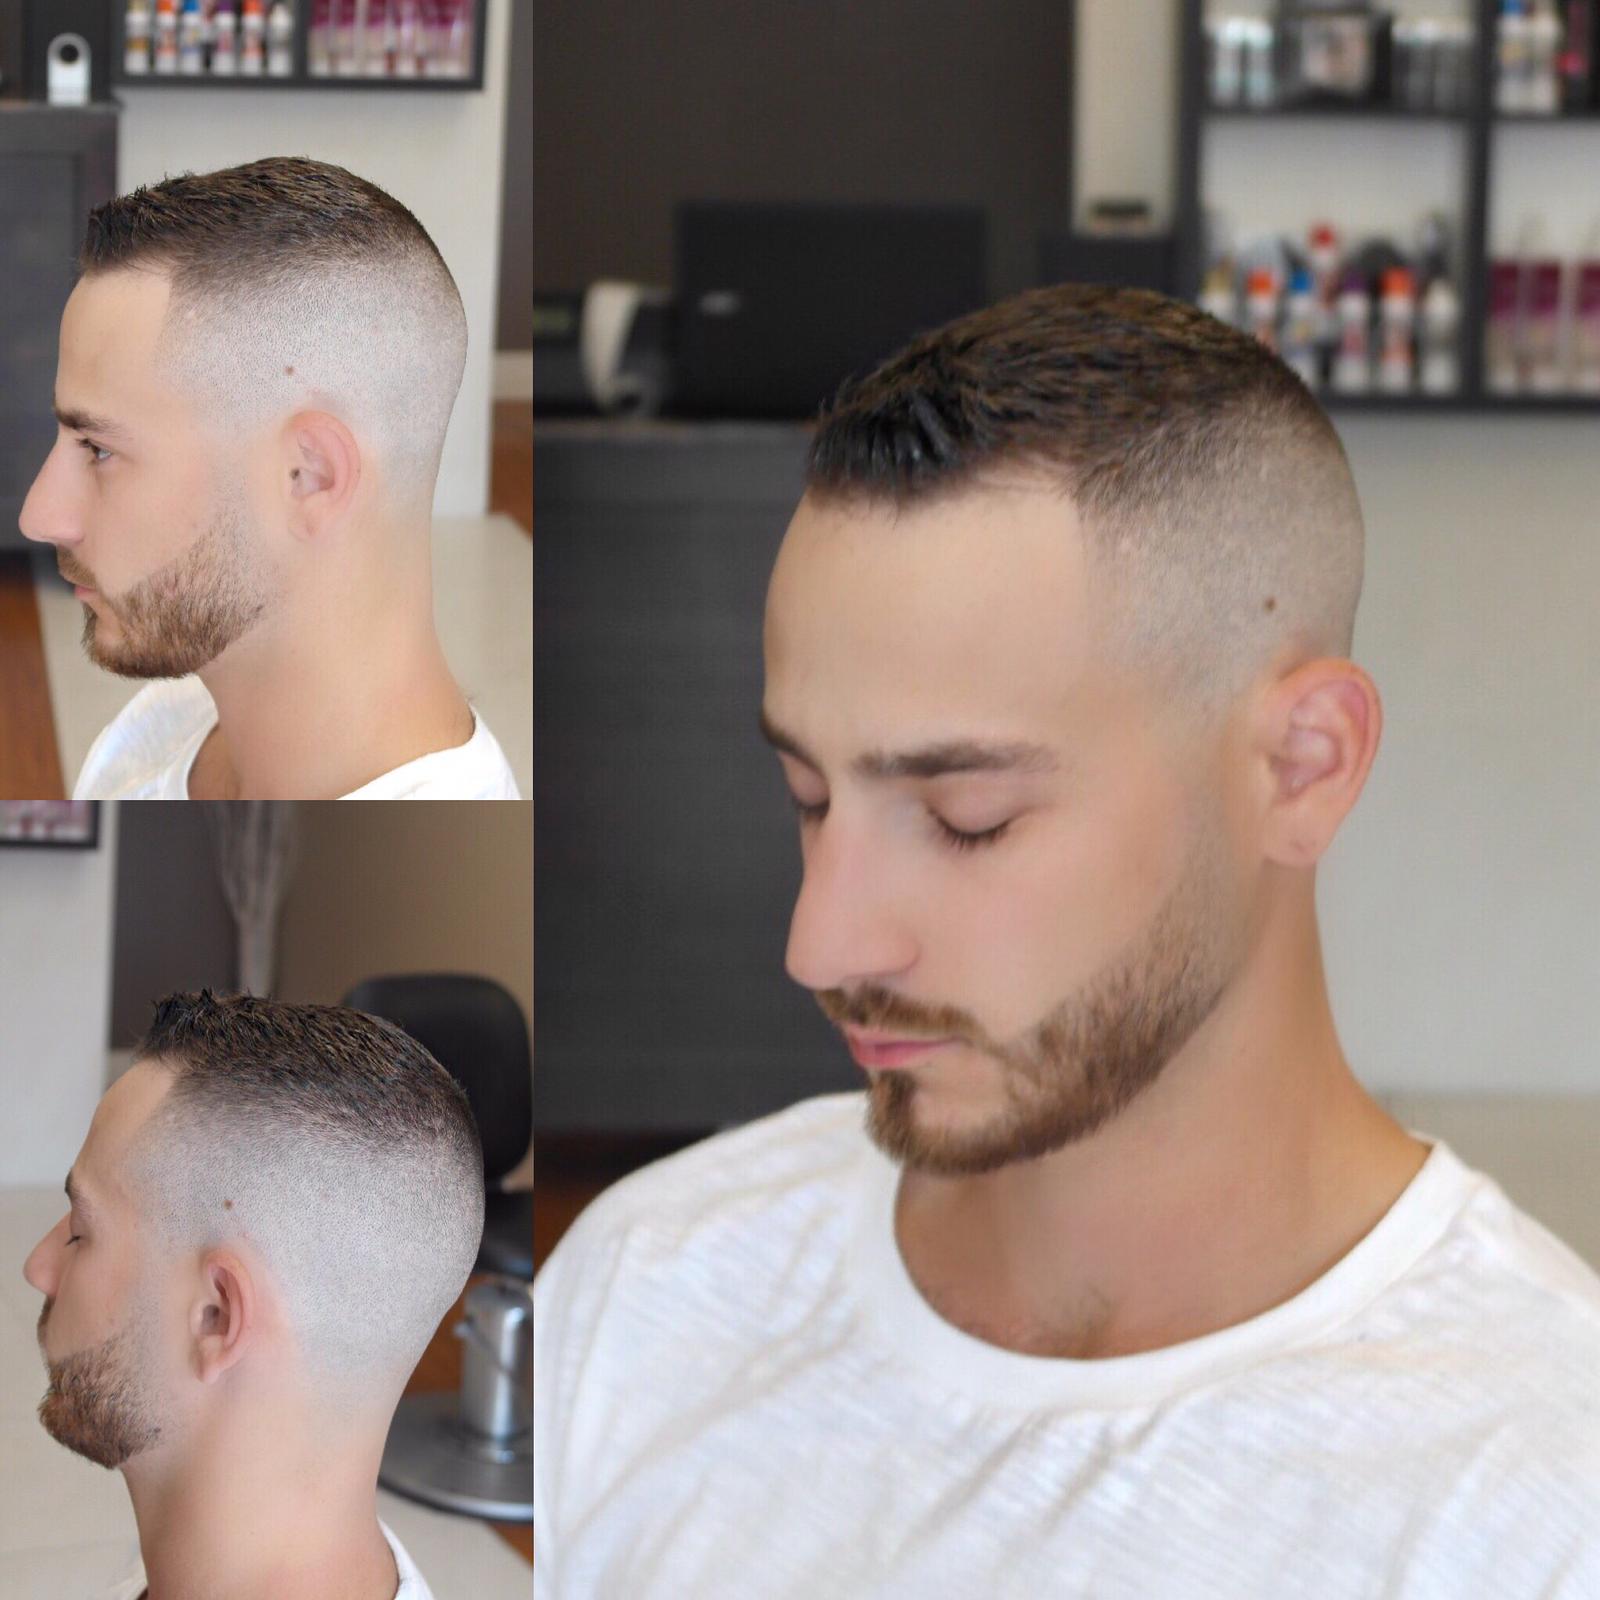 Magnificent Hair Salon – Feel the barbering at its best!